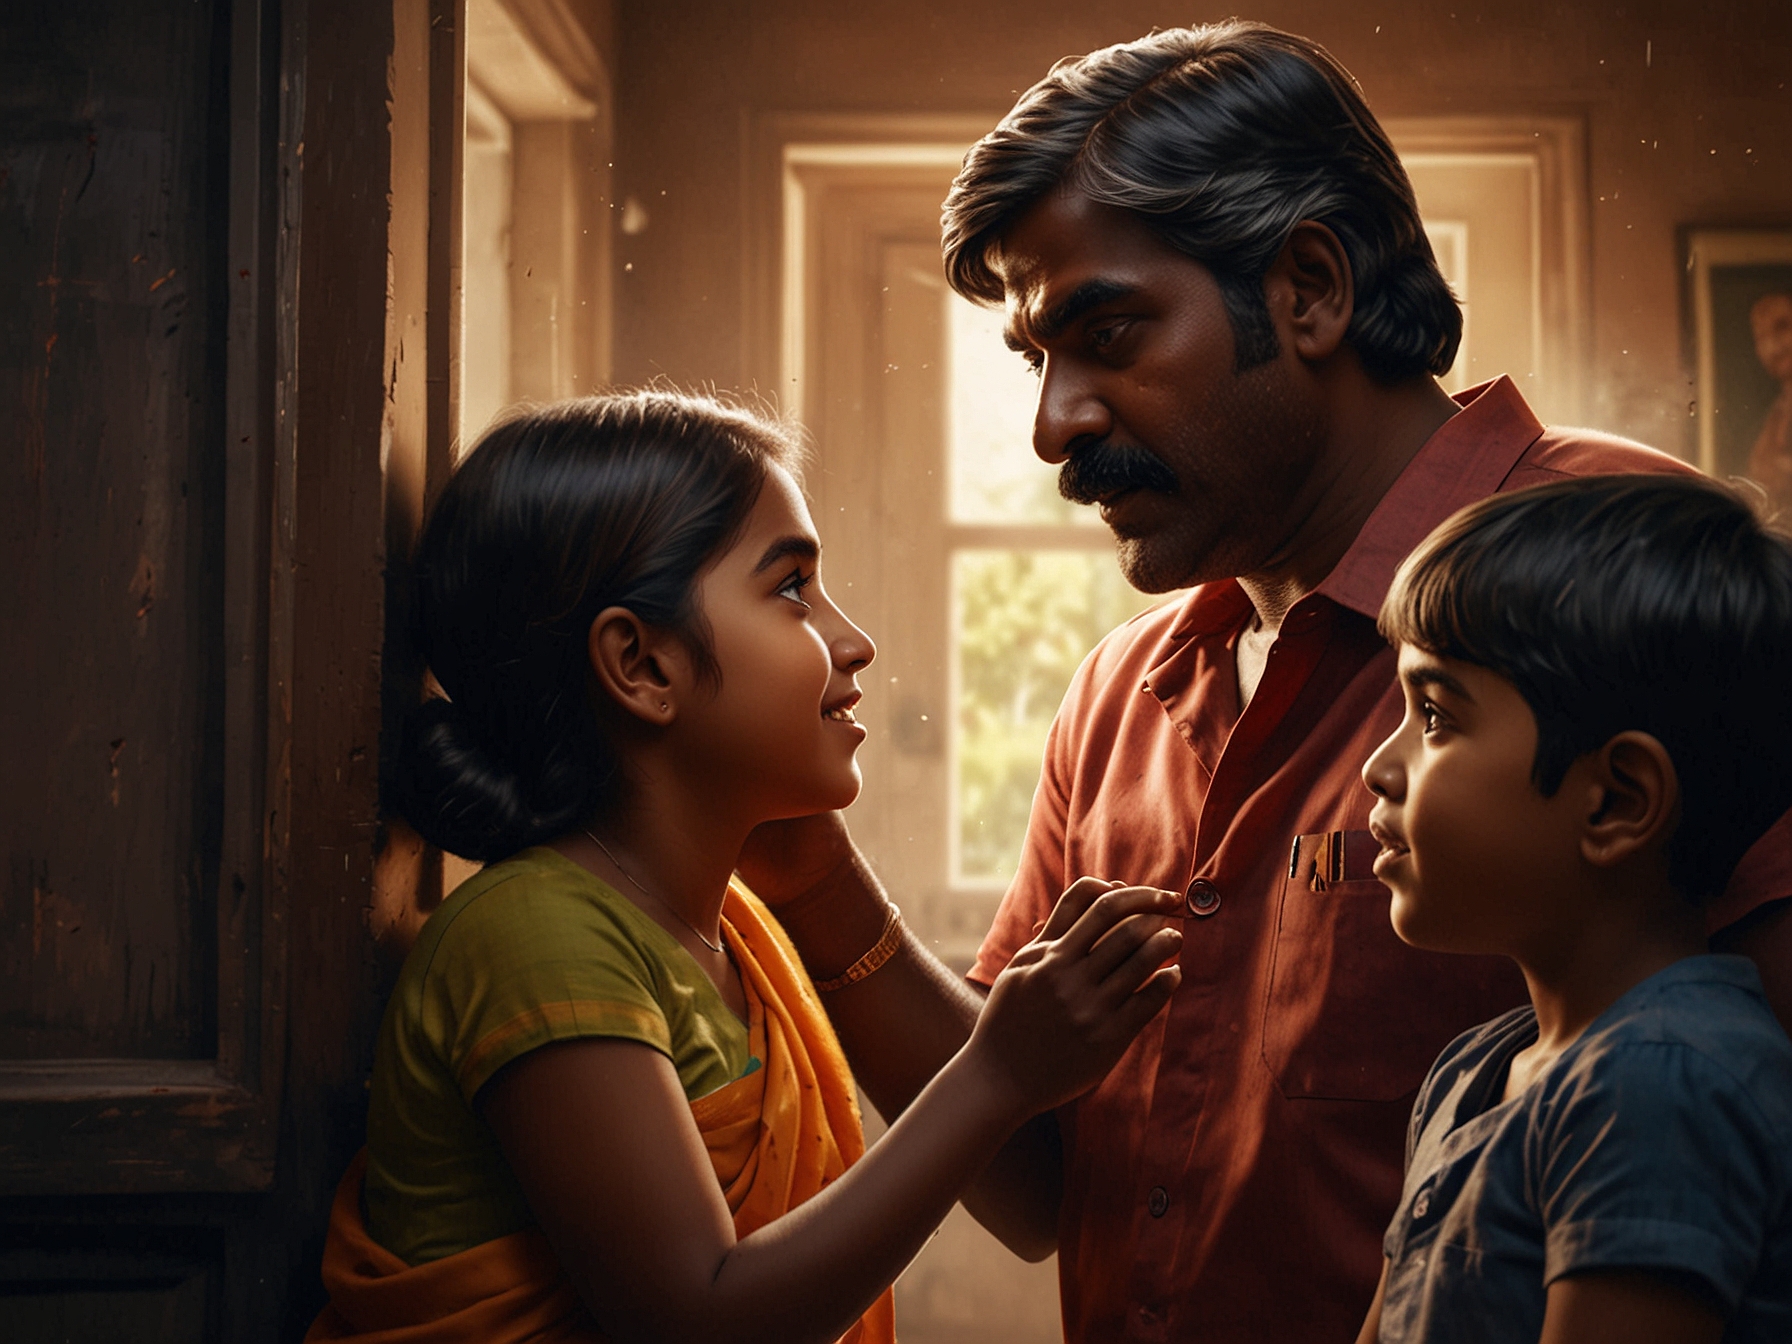 A candid moment between Sethupathi and his children, illustrating the open communication and mutual respect that shape his performances in Tamil cinema.